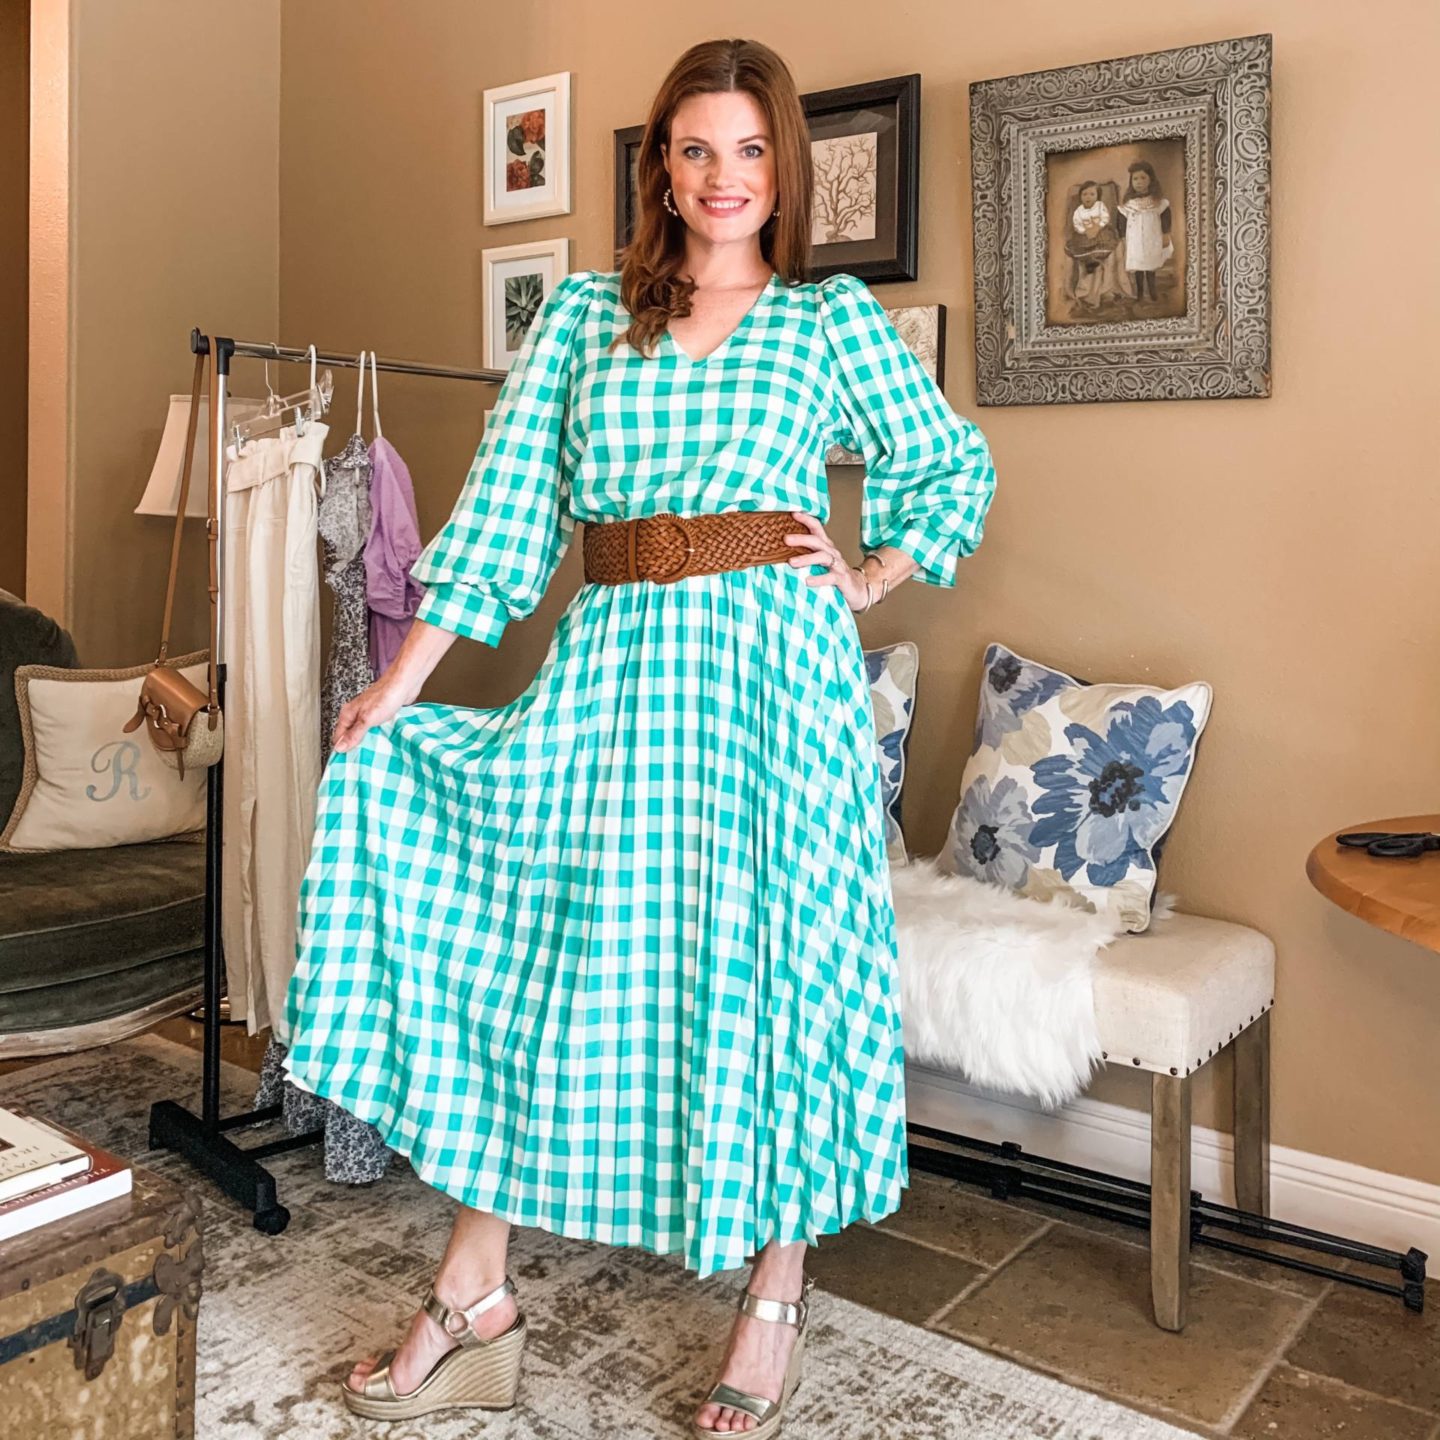 Green gingham top and skirt styled with wide belt